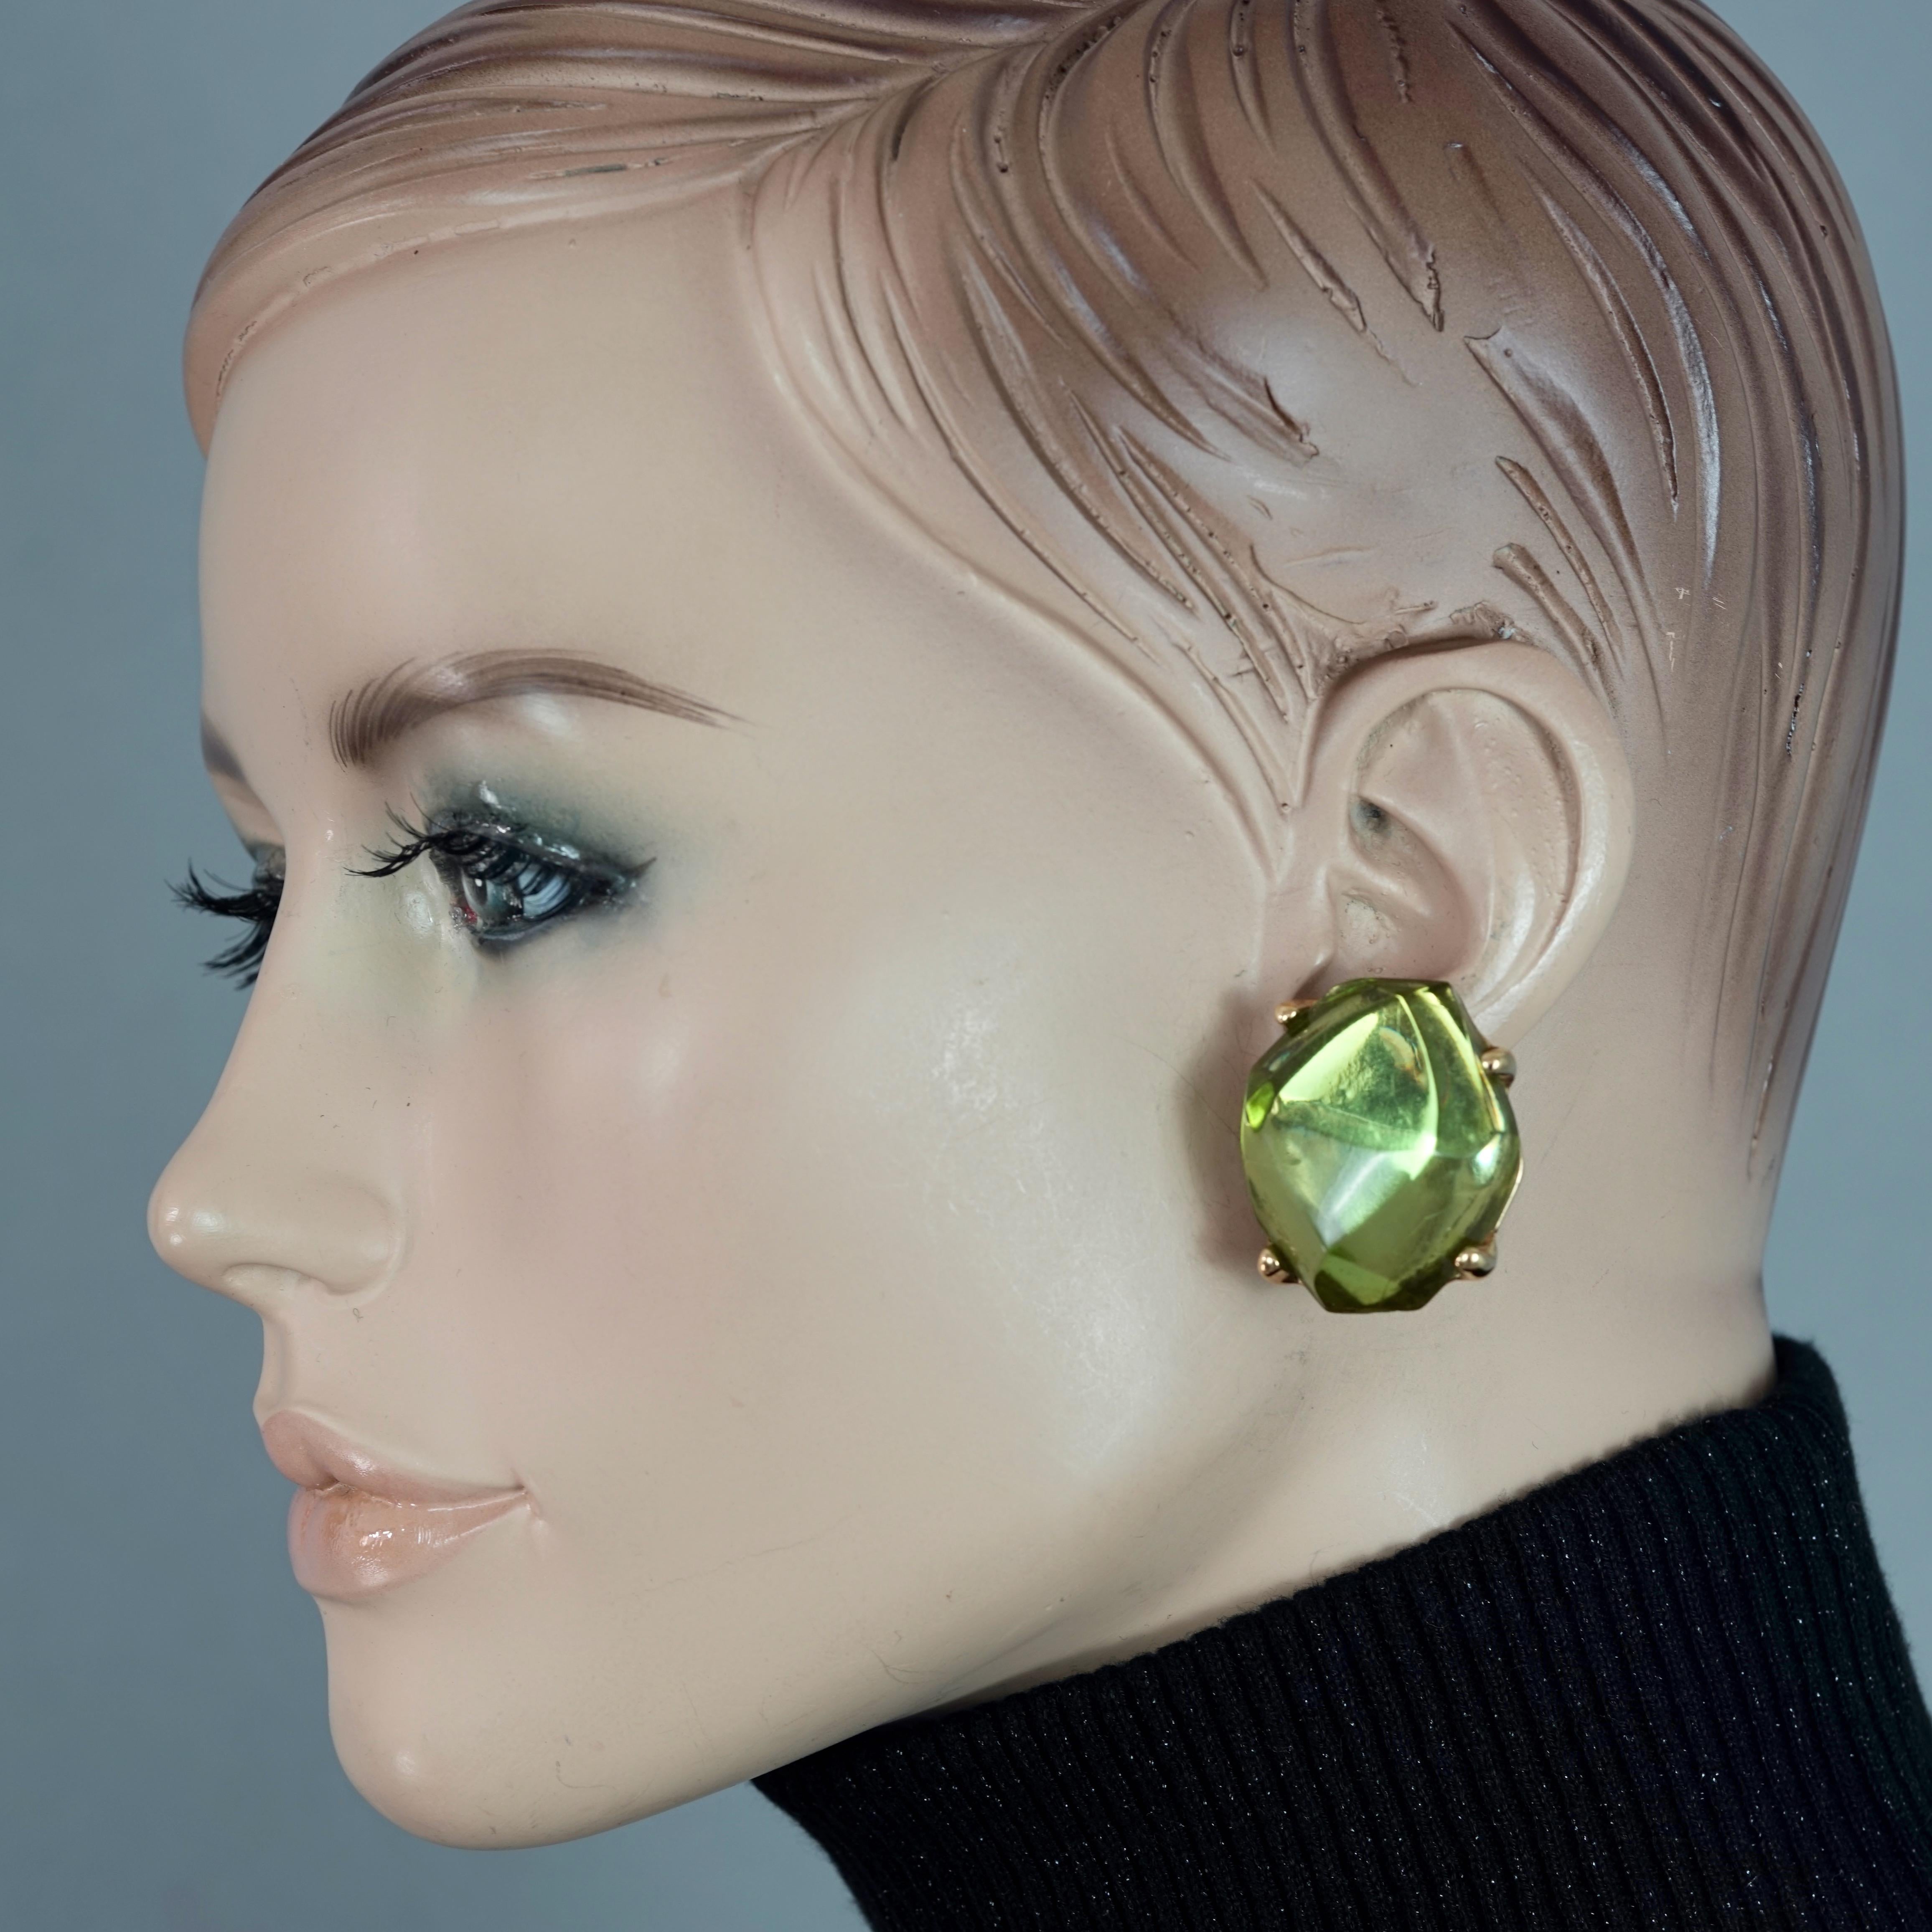 Vintage YVES SAINT LAURENT Ysl by Goossens Irregular Faceted Lucite Earrings

Measurements:
Height: 1.26 inches (3.2 cm)
Width: 1.14 inches (2.9 cm)
Weight per Earring: 19 grams

Features:
- 100% Authentic YVES SAINT LAURENT.
- Lucite and irregular